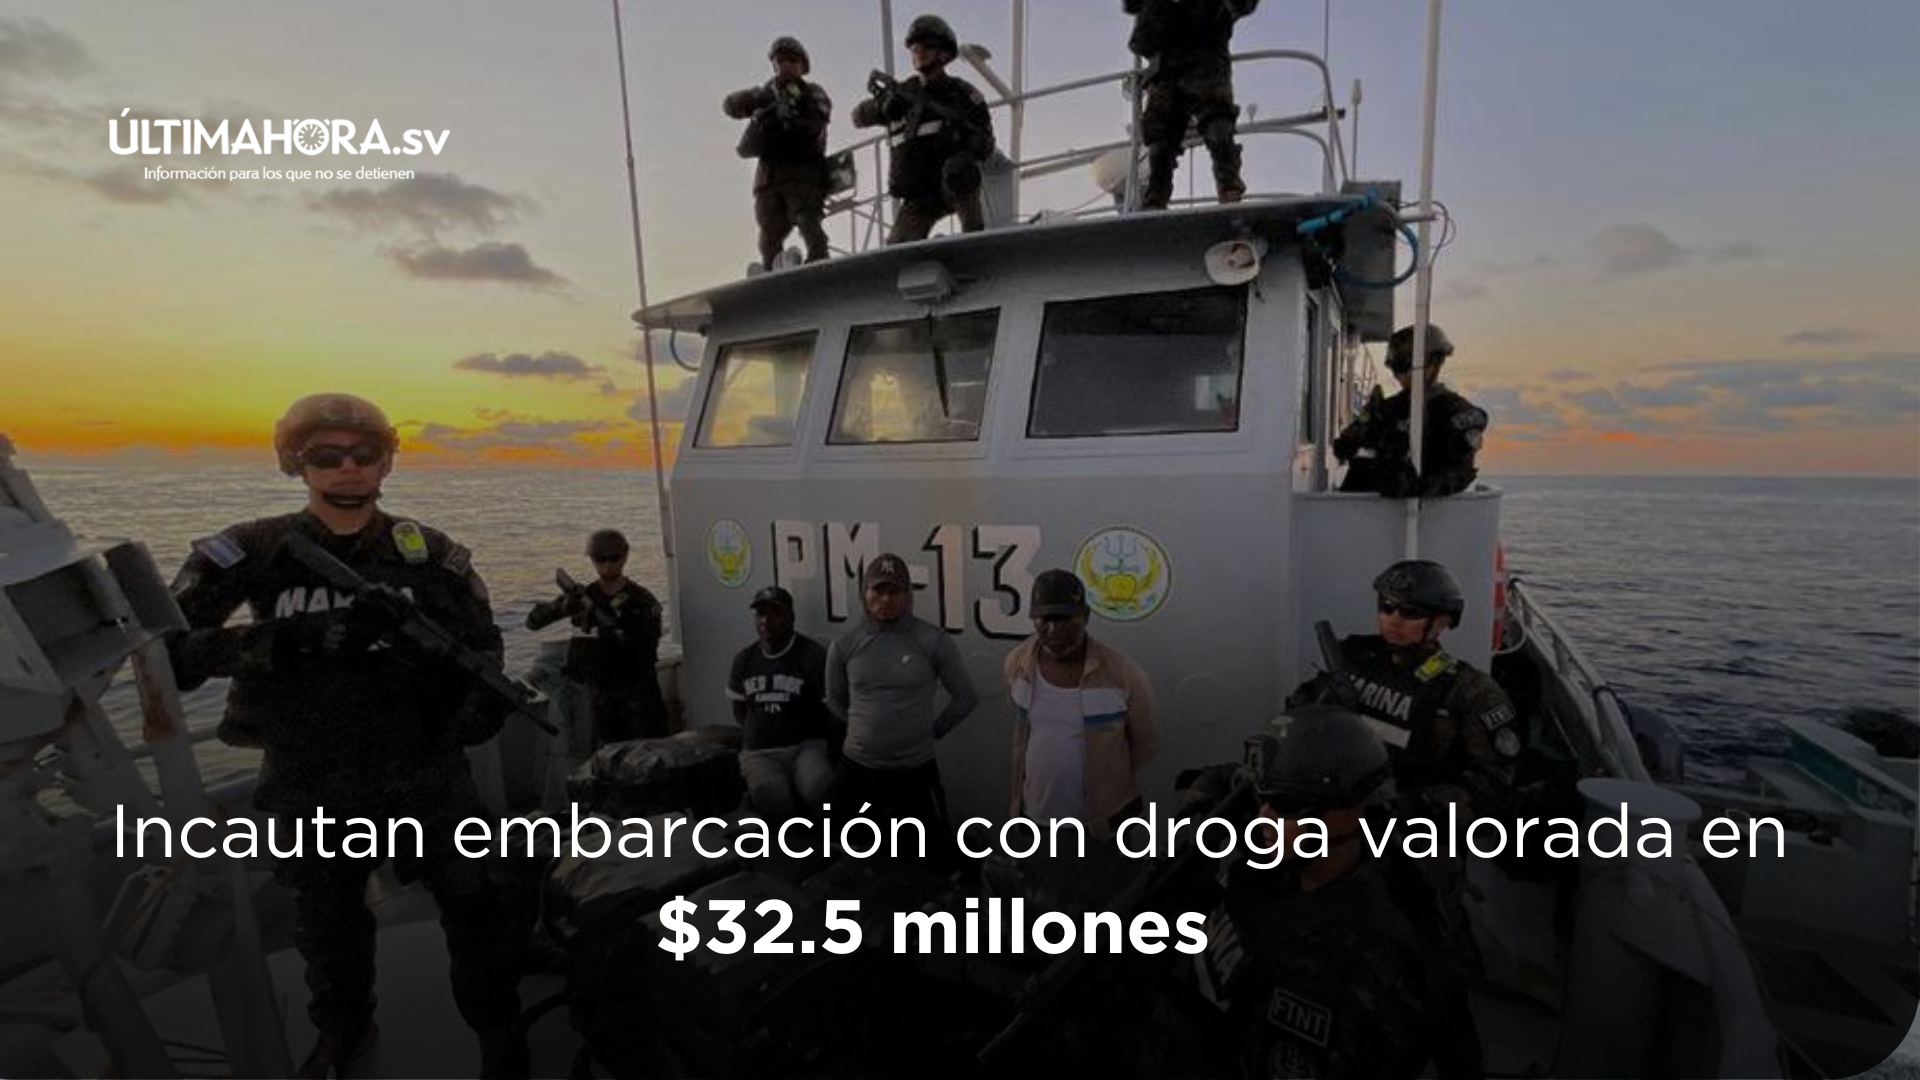 They seized a ship with medicine value $32.5 million